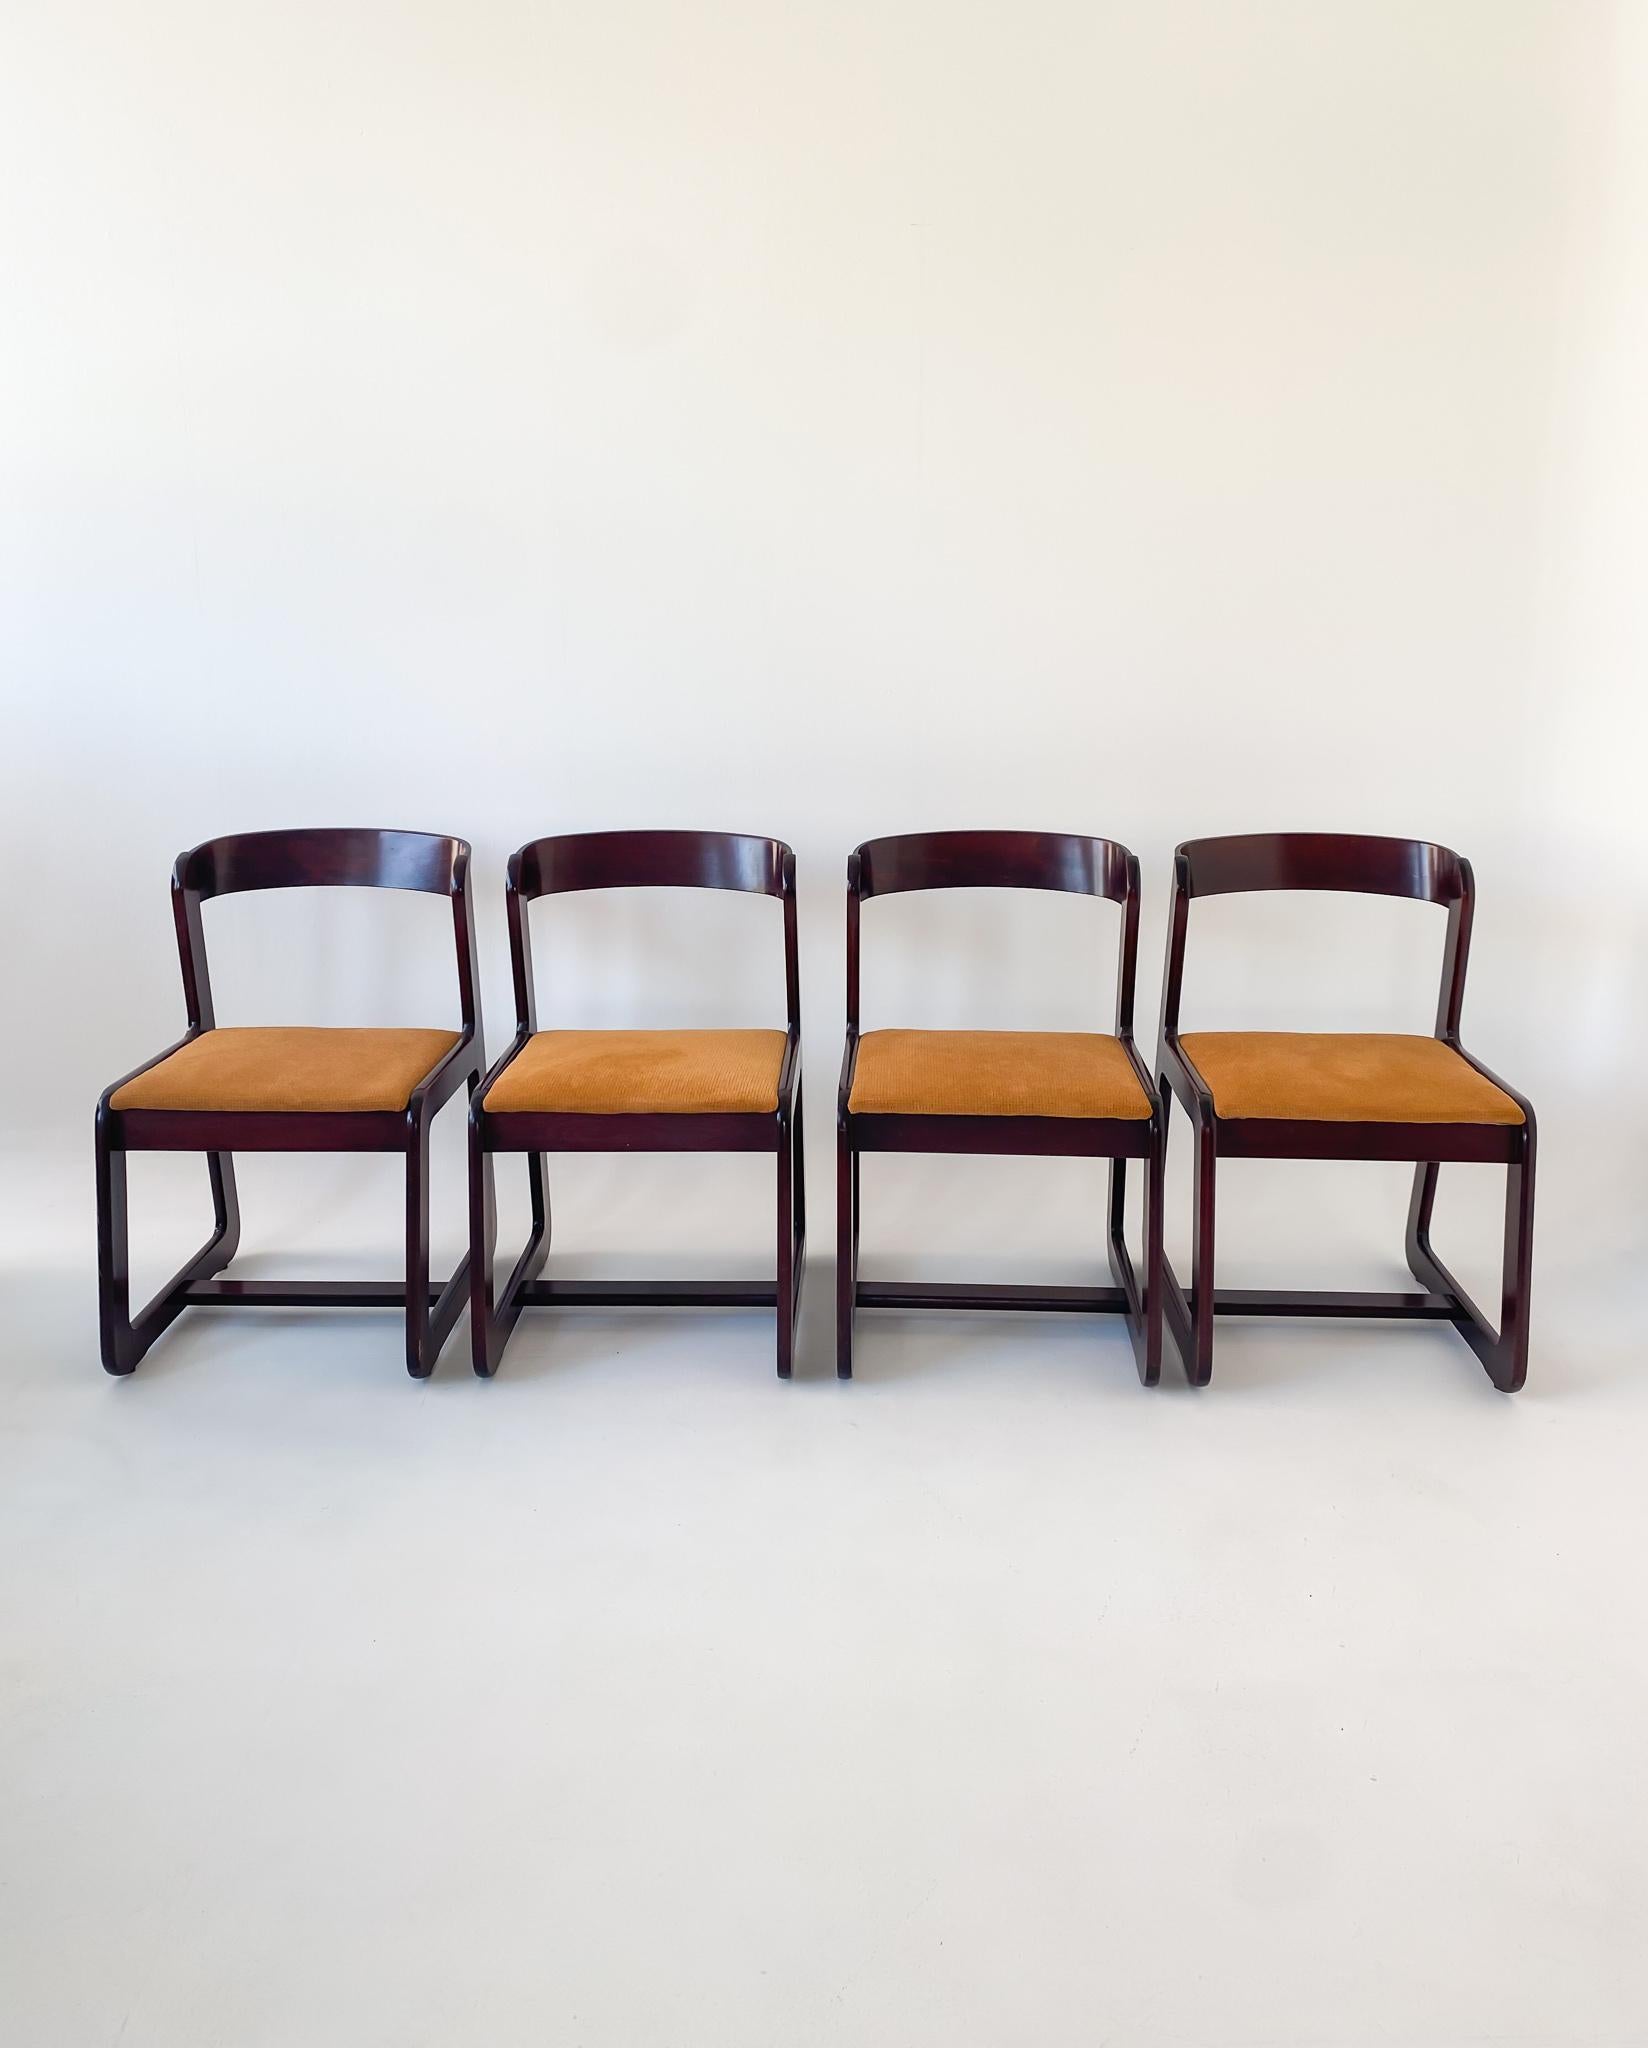 Italian Mid-Century Modern Set of 4 Dining Chairs by Willy Rizzo for Mario Sabot 1970s